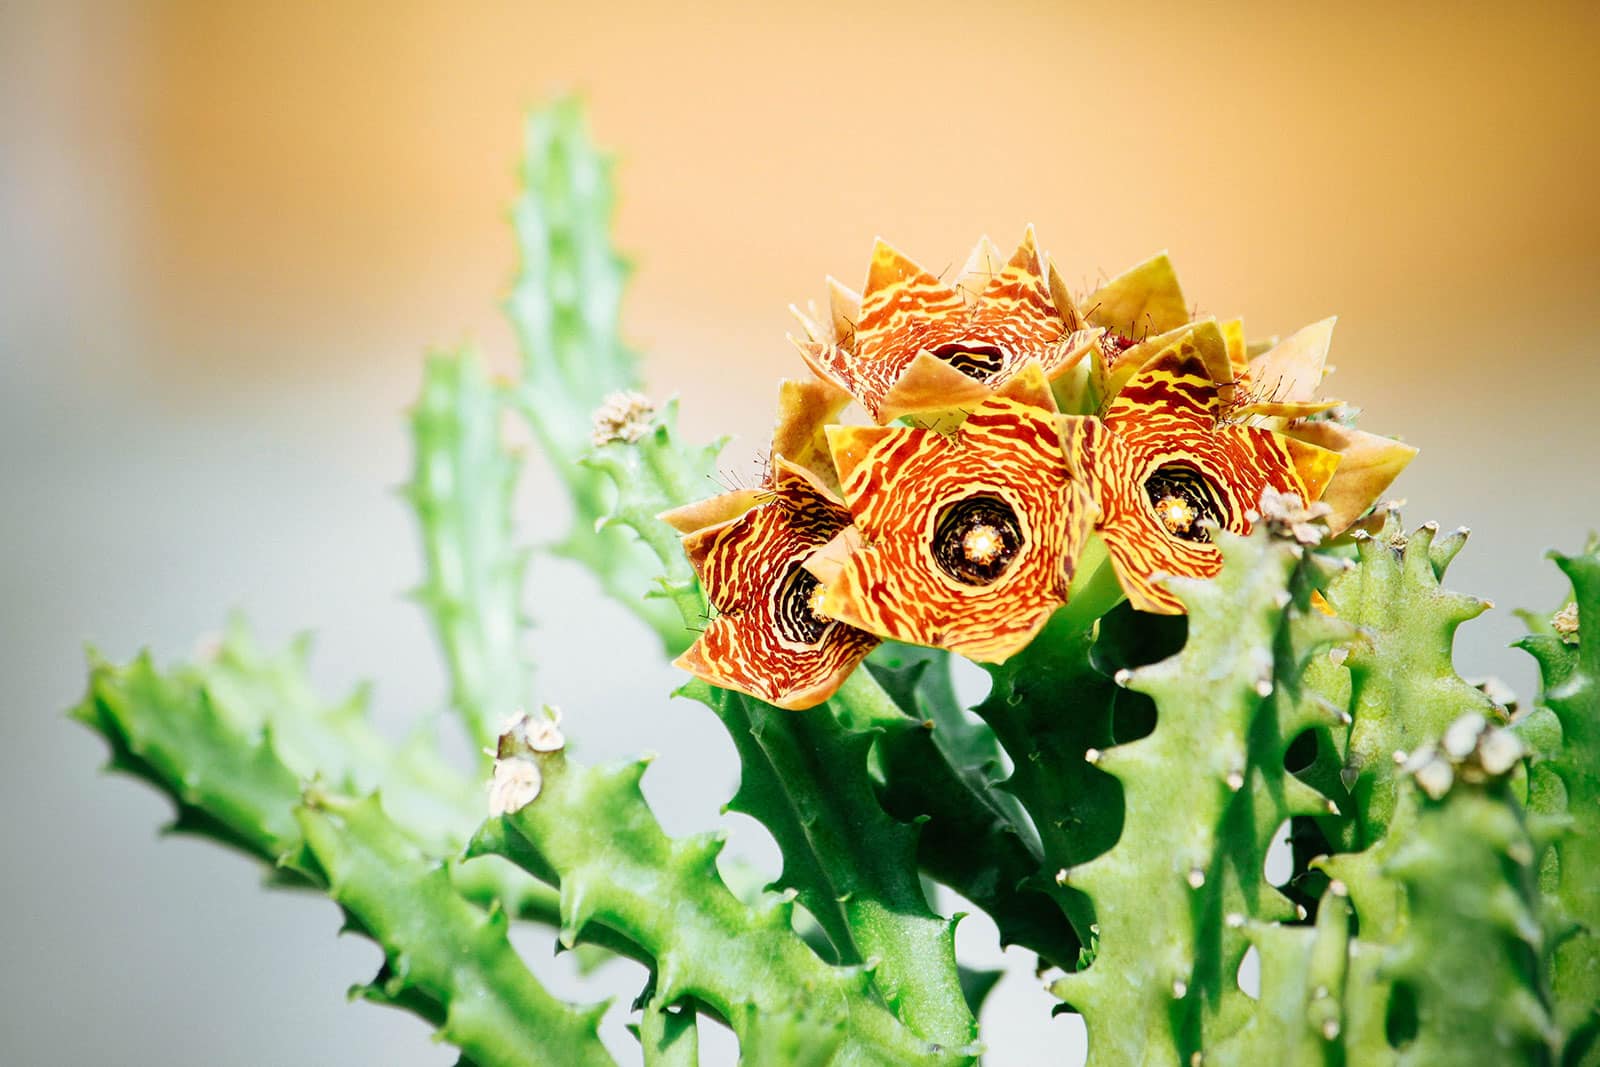 Huernia succulent with star-shaped maroon and yellow flowers